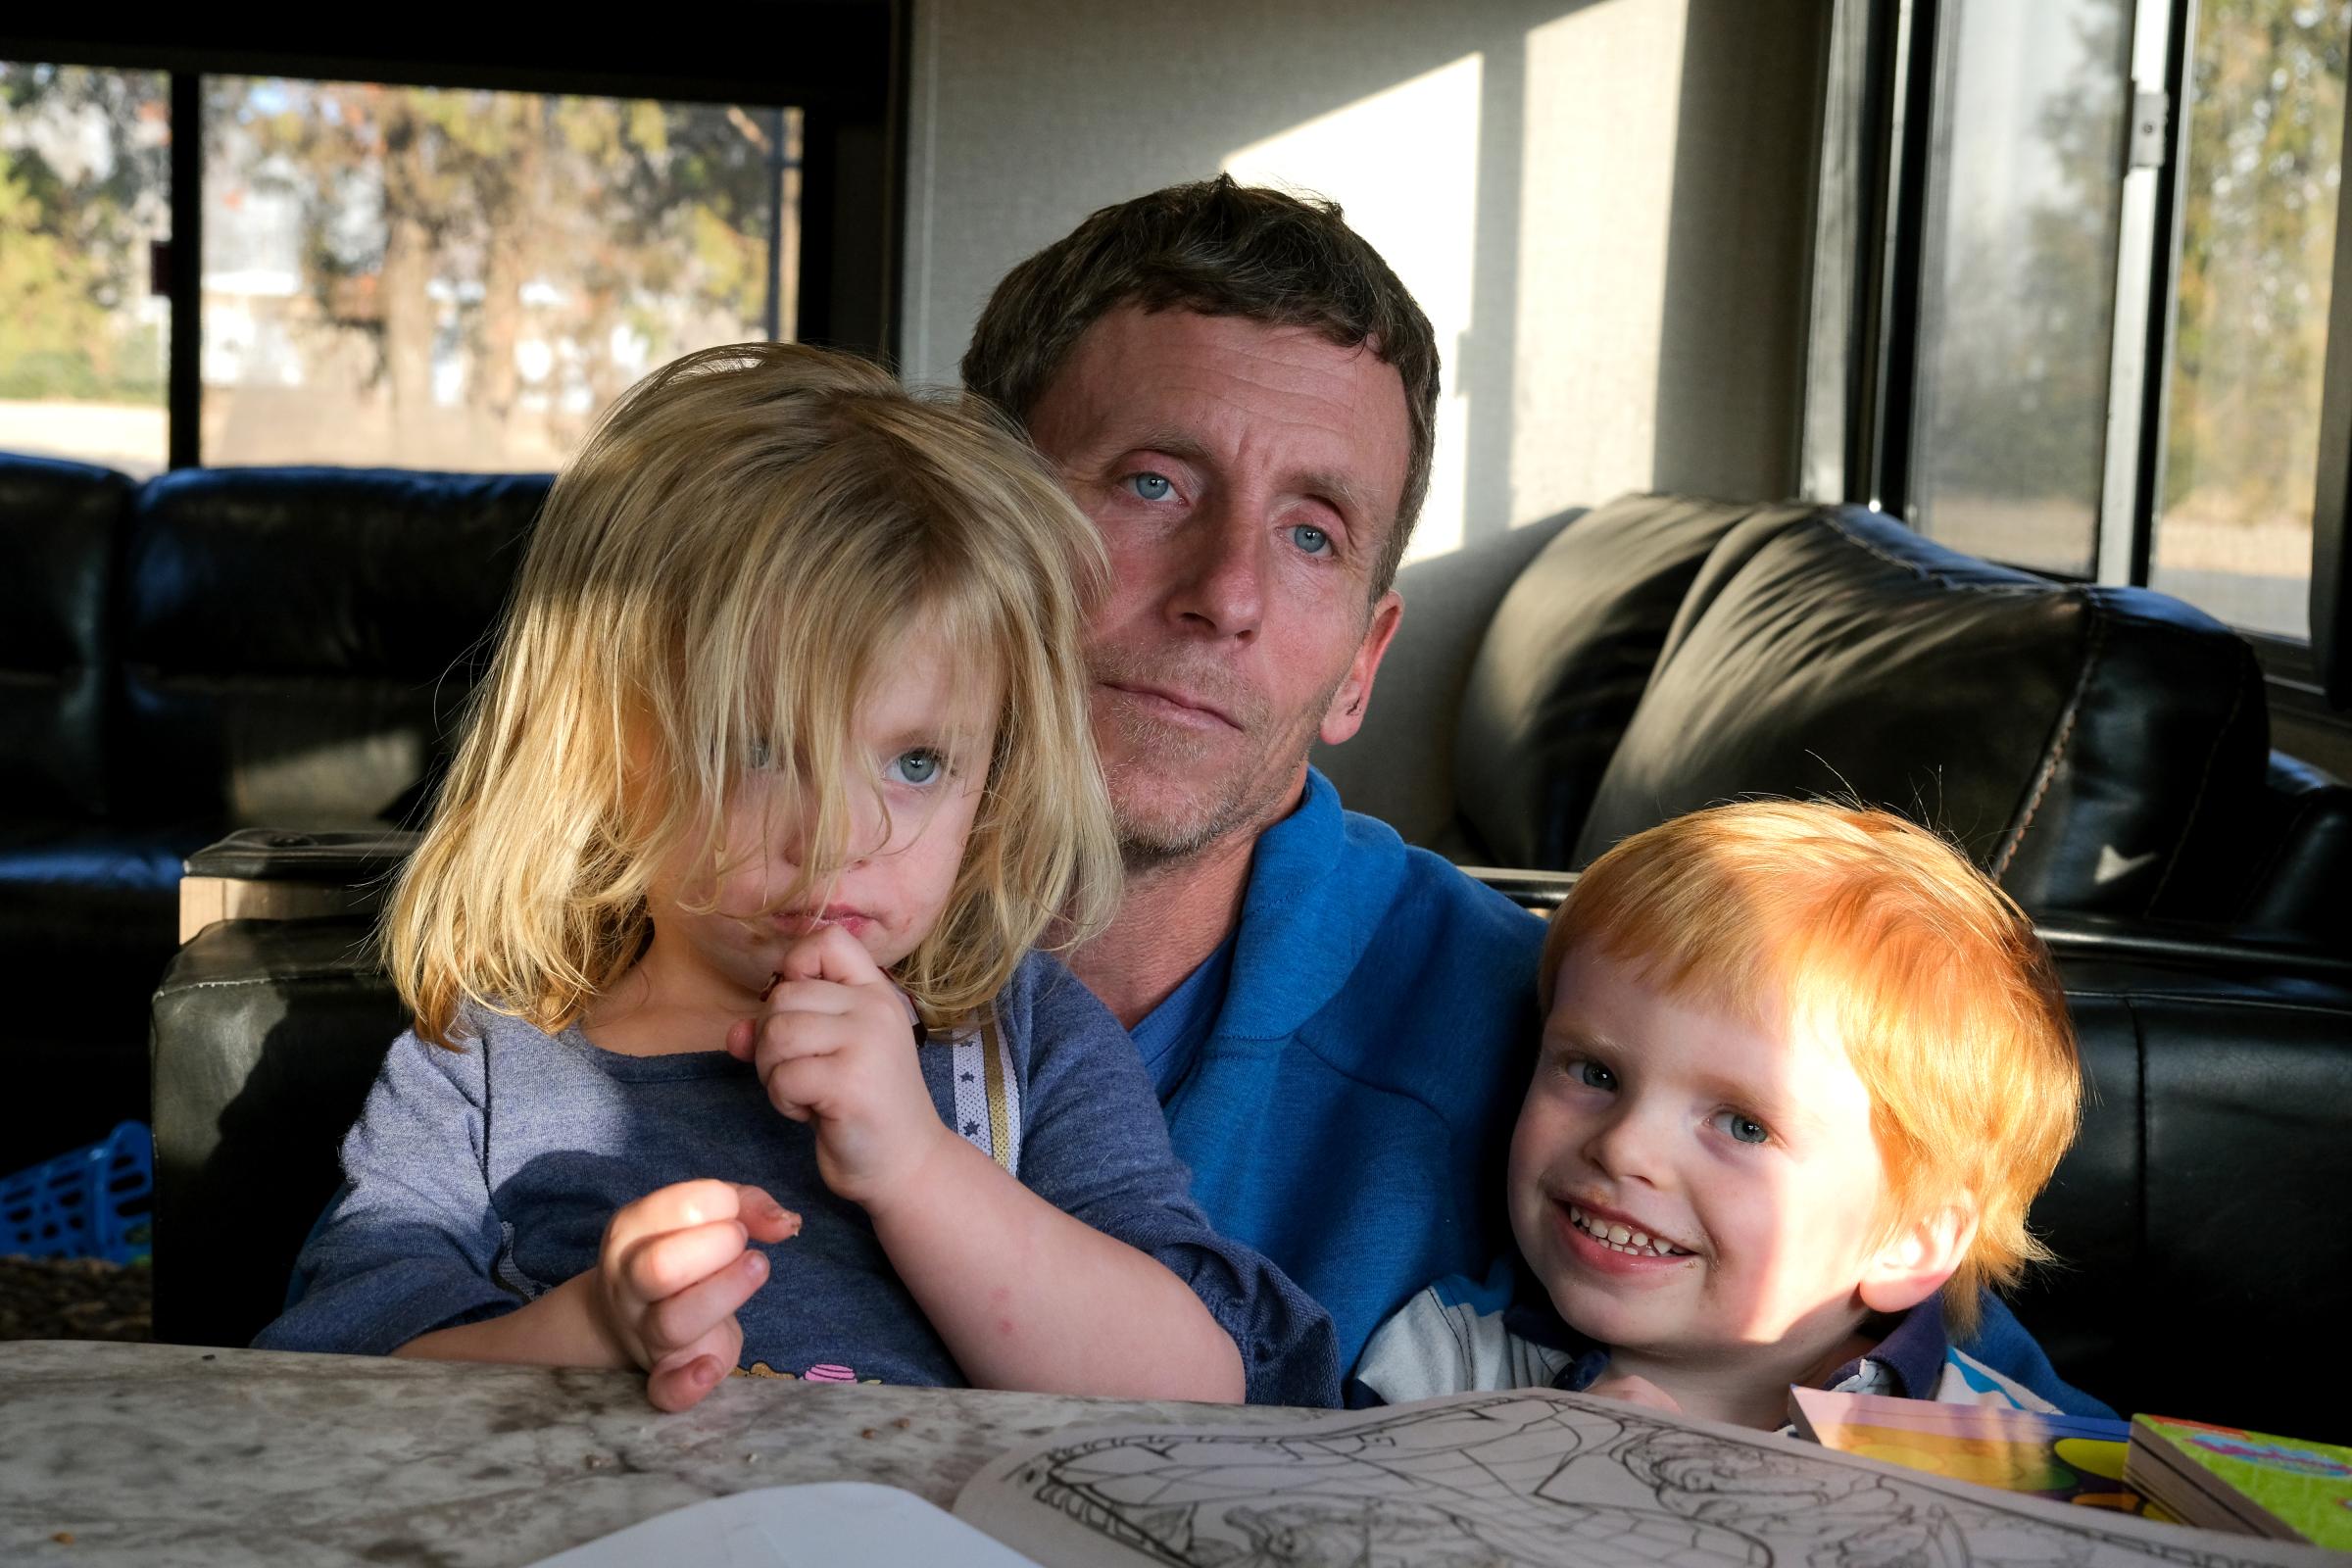 Floyd Bledsoe and his children Brynlee and Bryce pose for a portrait in their home in Hutchinson, Kansas, USA on January 15, 2022. Assignment code 20220115InnocentMan Hutchinson USA